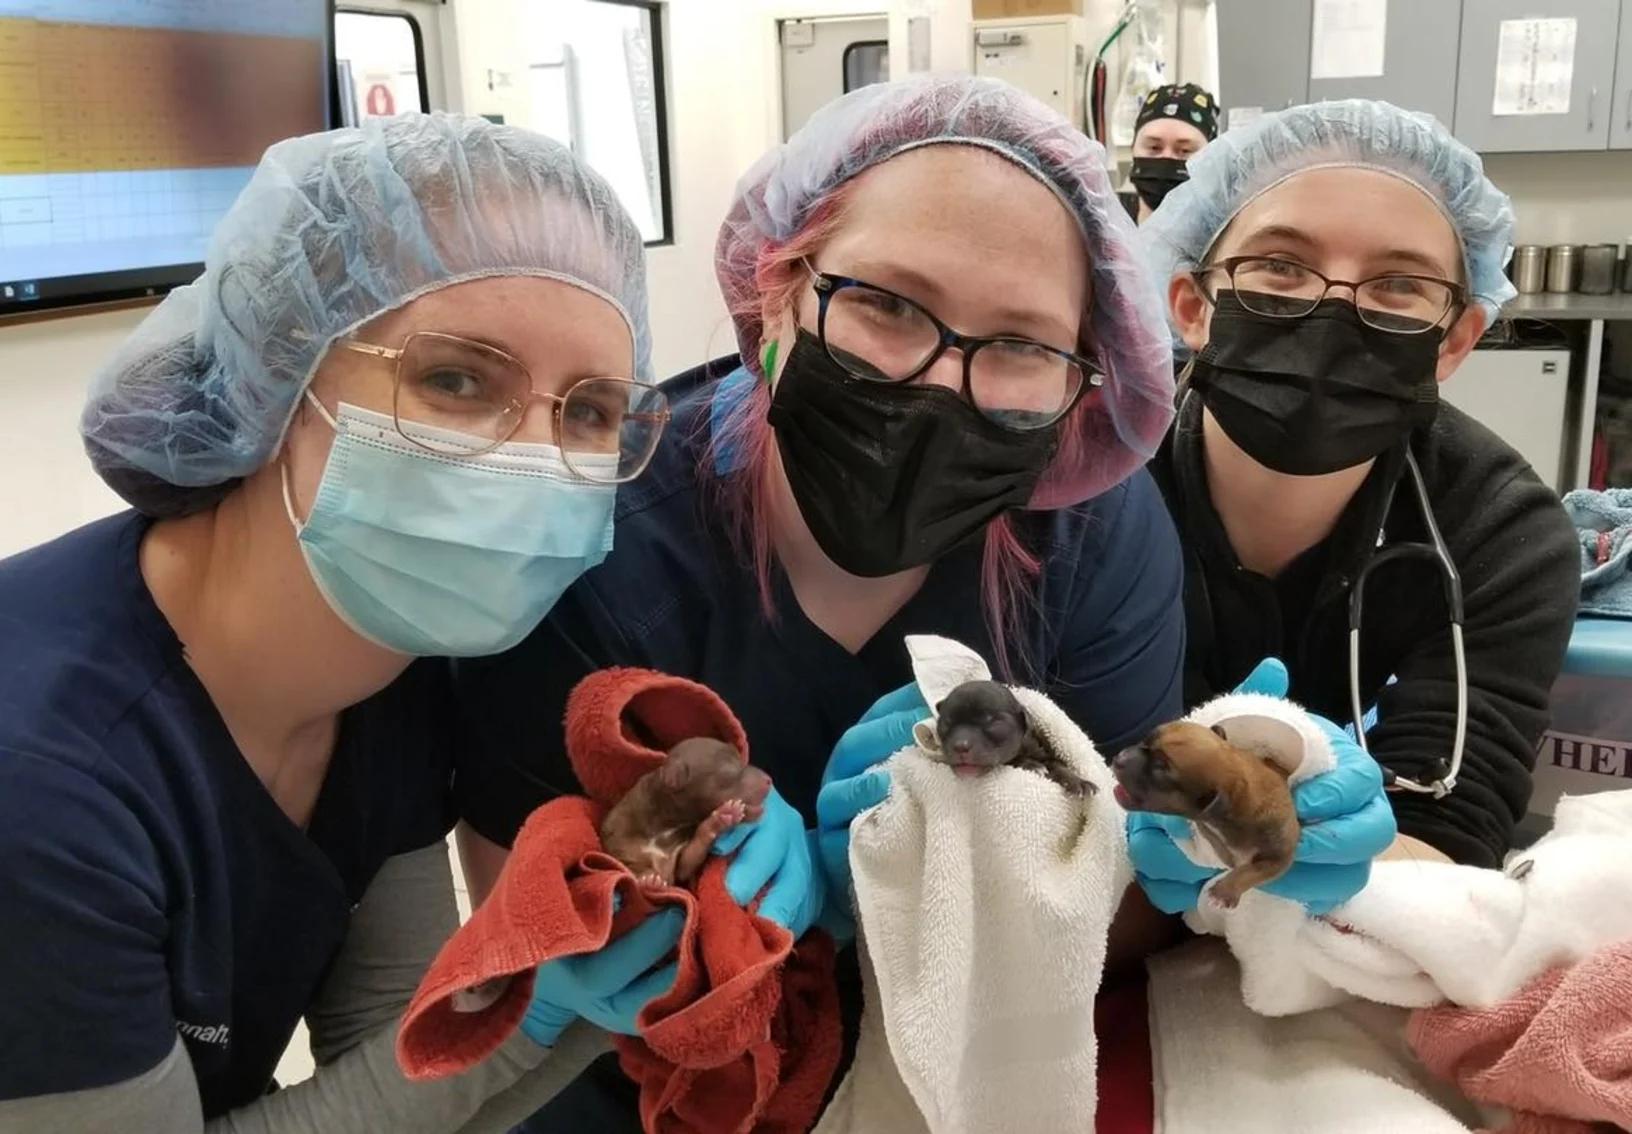 Pet+ER staff holding newborn puppies wrapped in cloths.